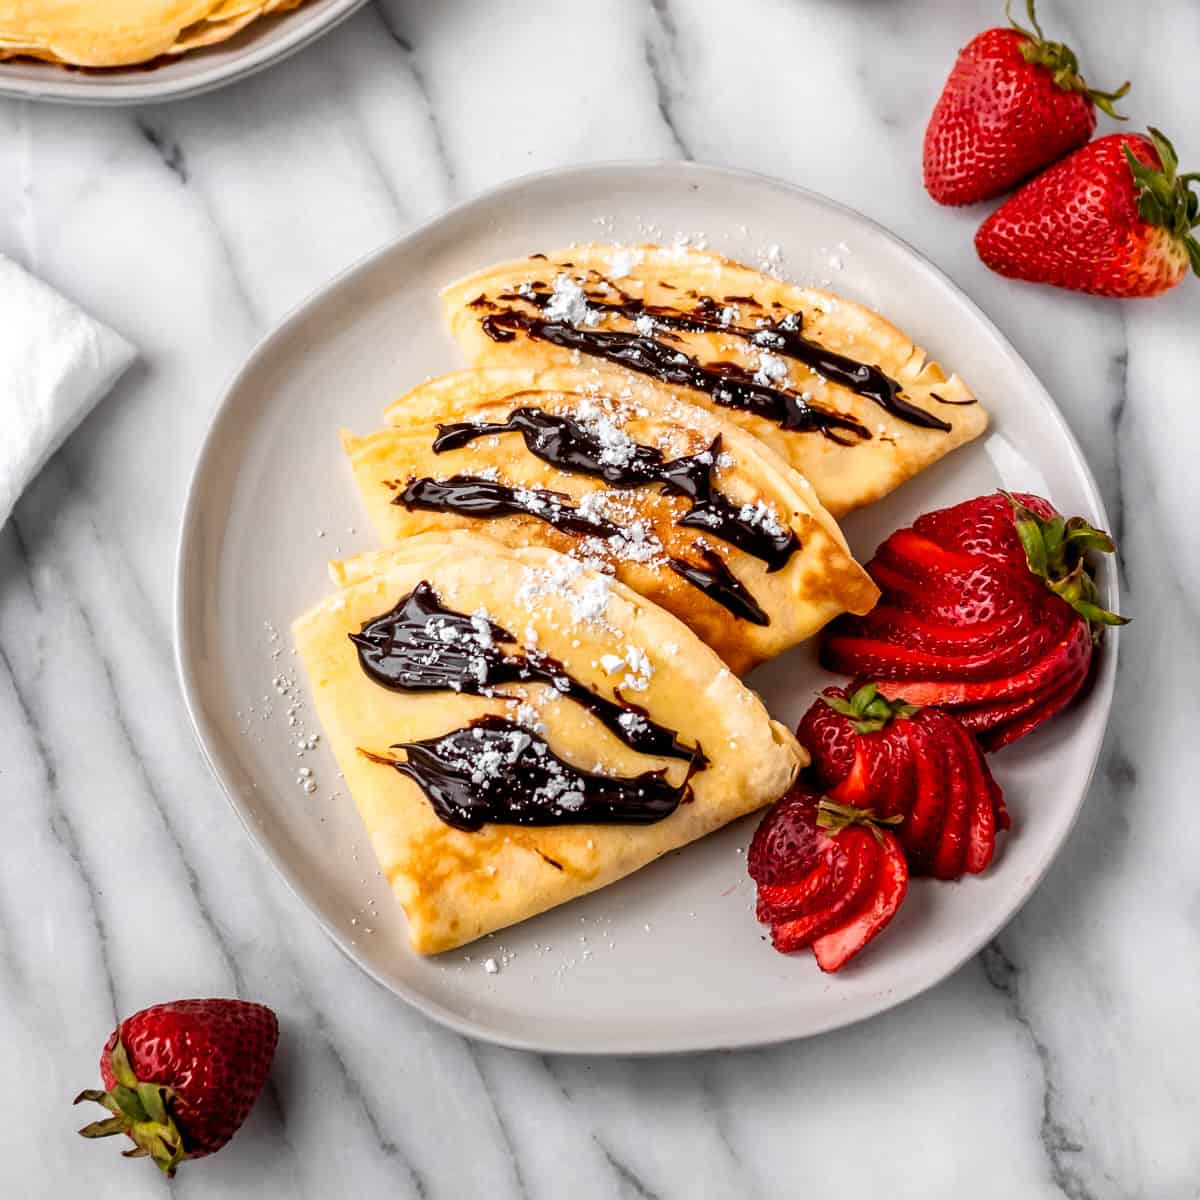 Easy French Crepes Recipe